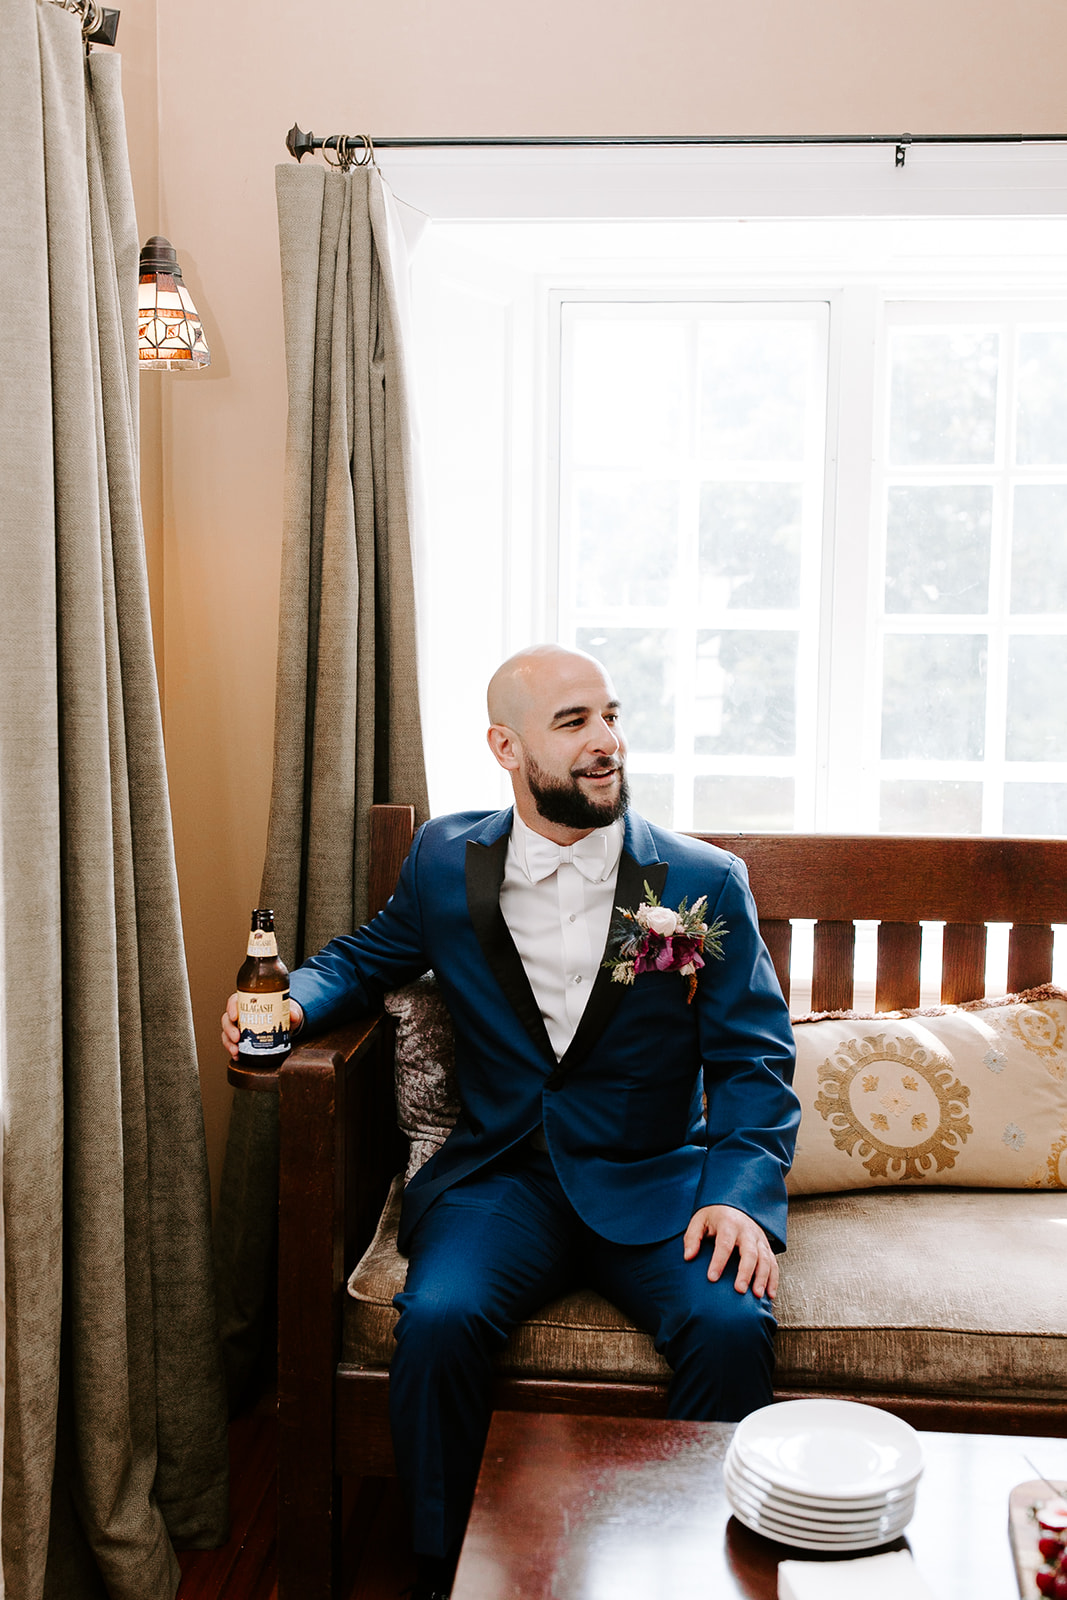 handsome groom enjoys a beer to knock the edge off before his dreamy wedding day